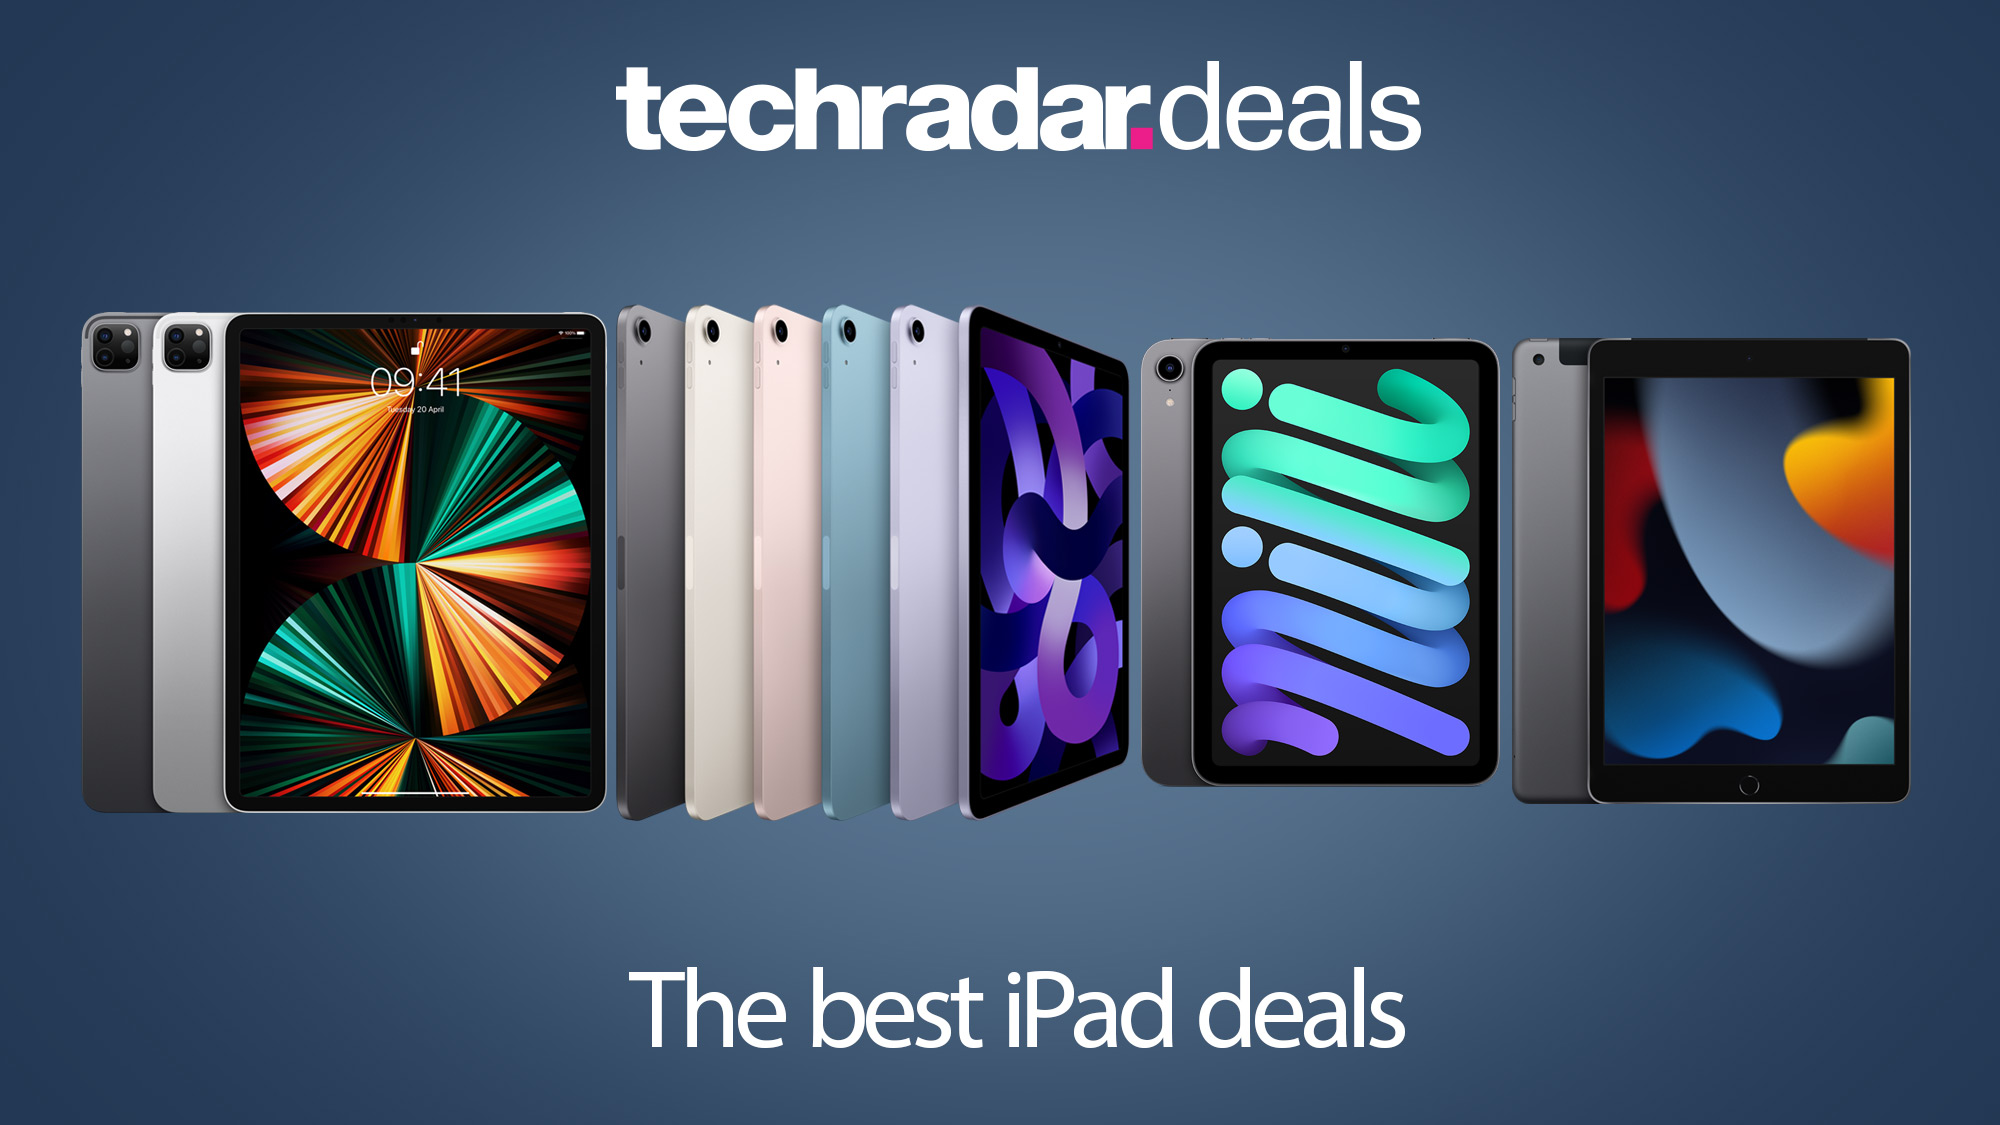 Row of iPads on blue background with  deals logo and cheap iPad deals title text